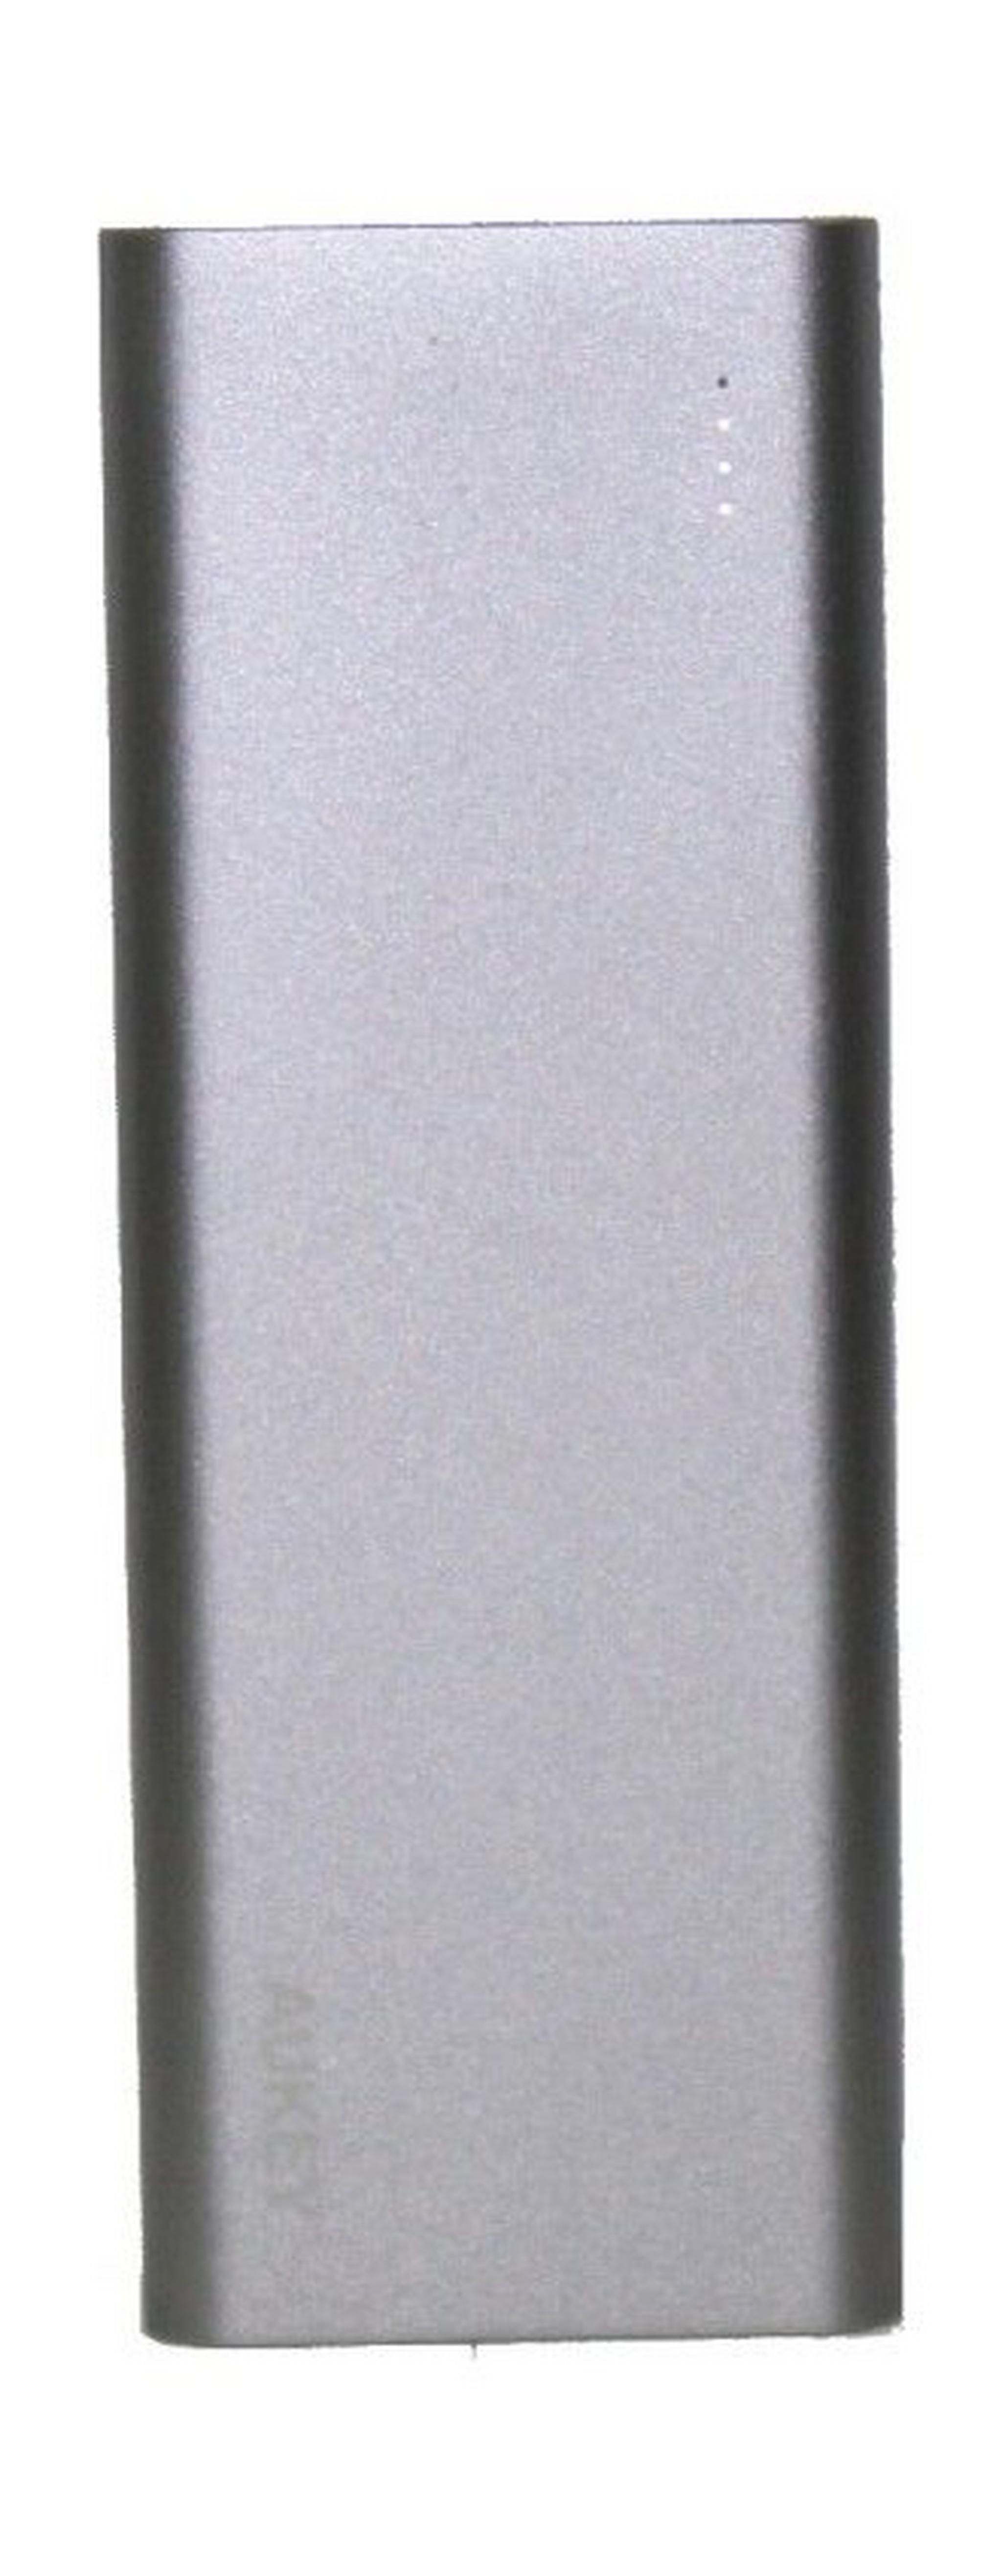 aukey-10050mah-quick-charge-3-0-power-bank-grey